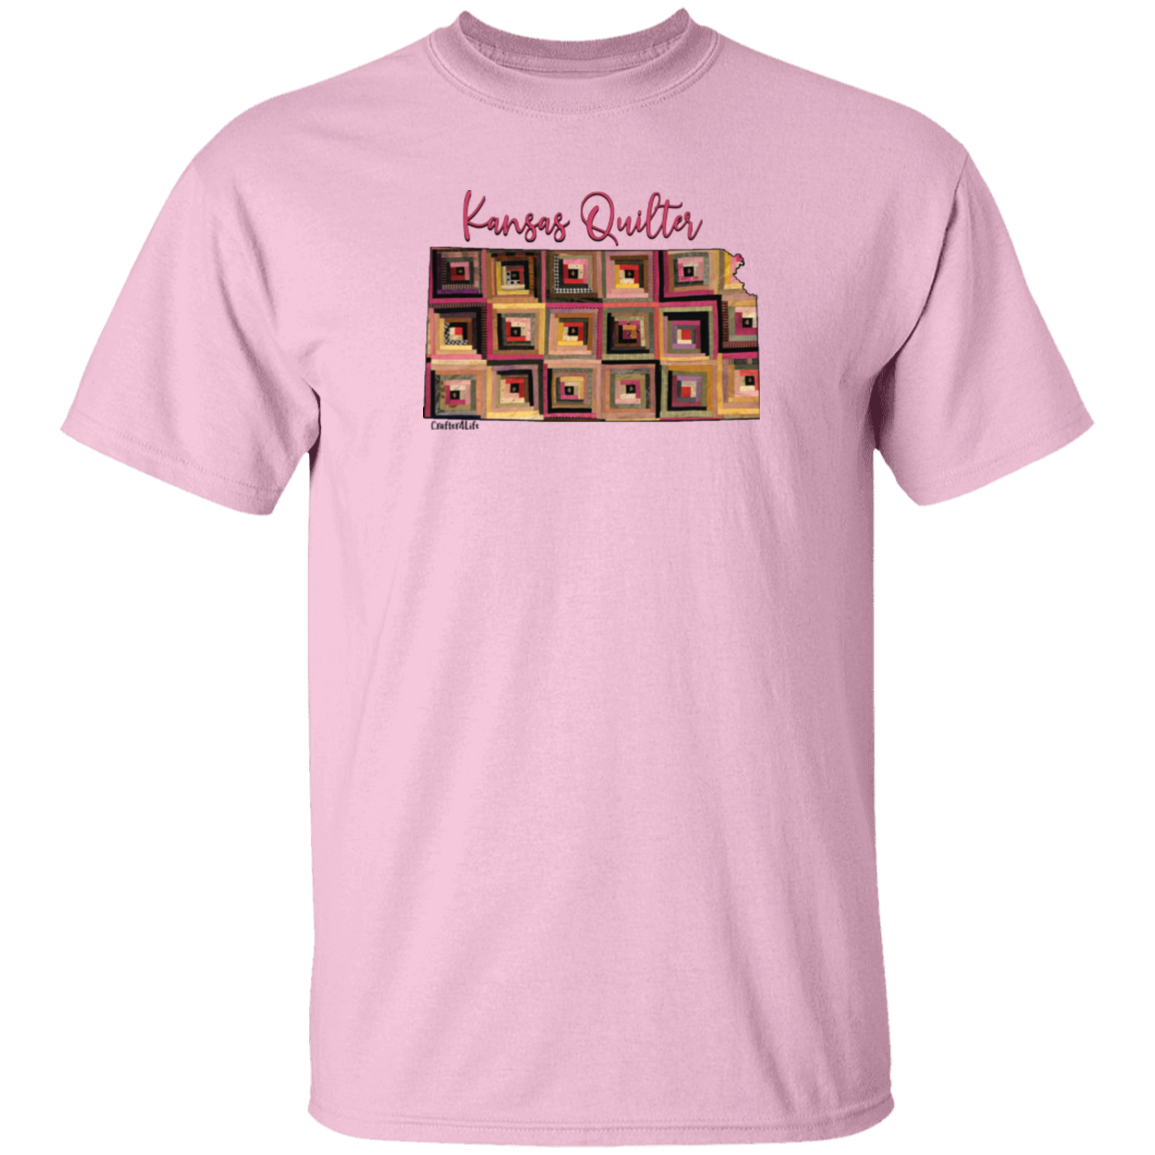 Kansas Quilter T-Shirt, Gift for Quilting Friends and Family